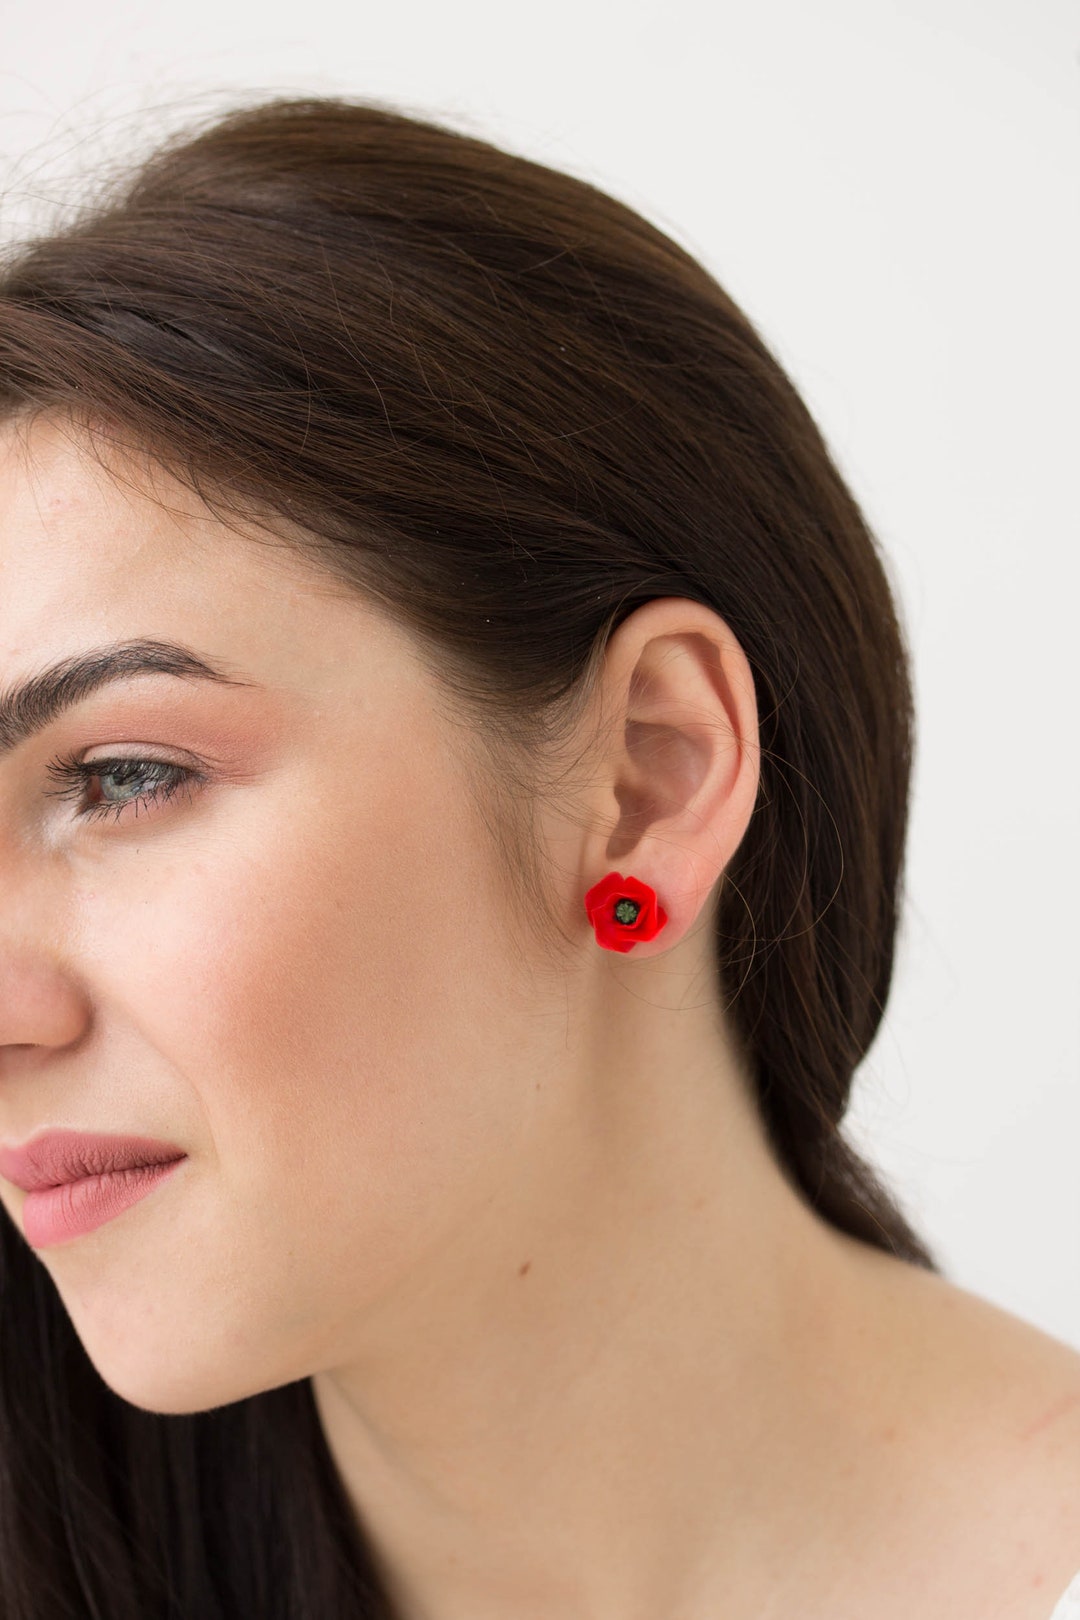 Red Poppies Stud Earrings Women Small Hypoallergenic Mother Etsy 日本